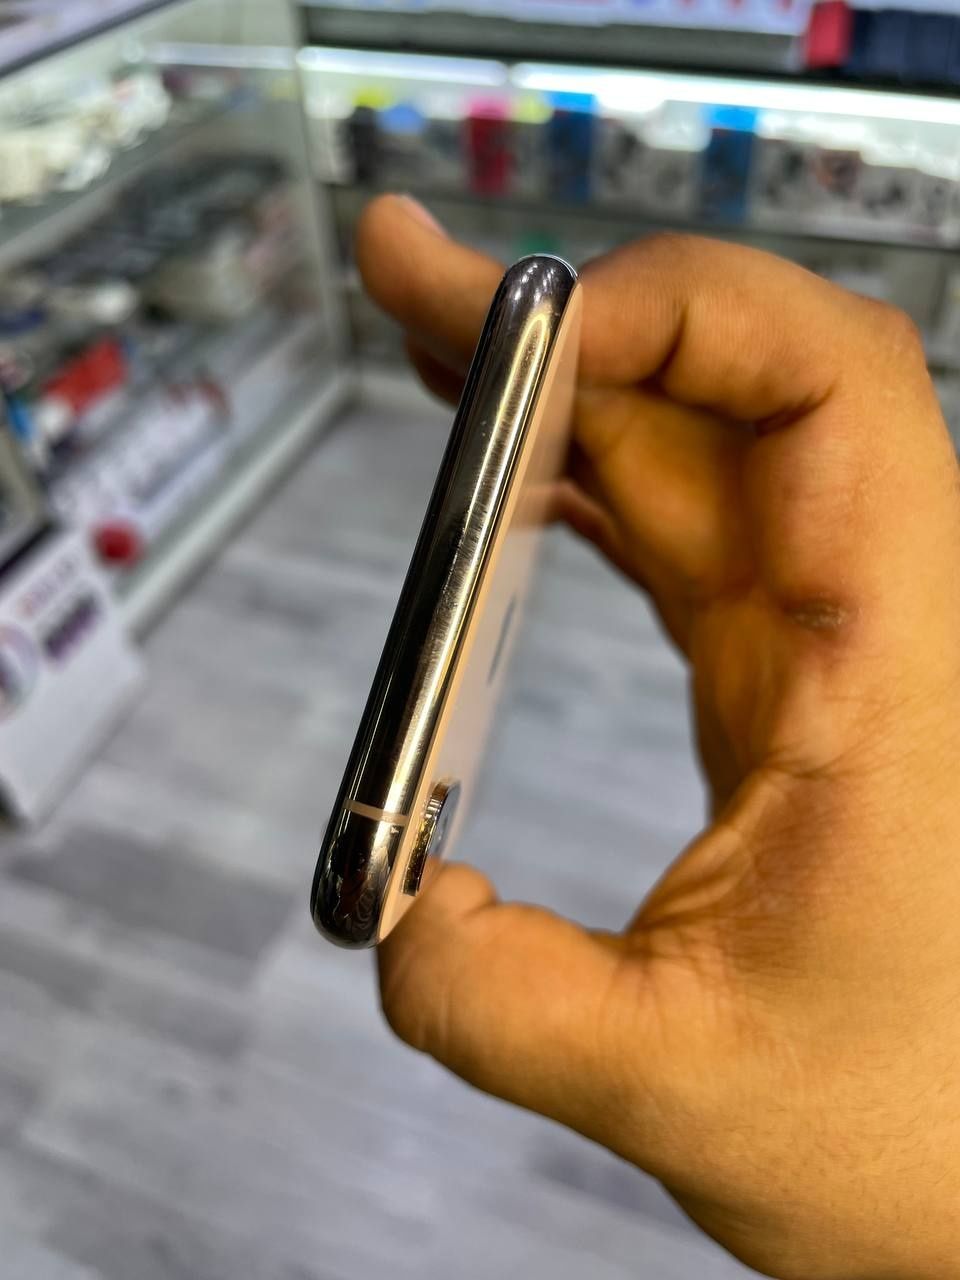 iPhone Xs LL/A 512 GB Gold ideal